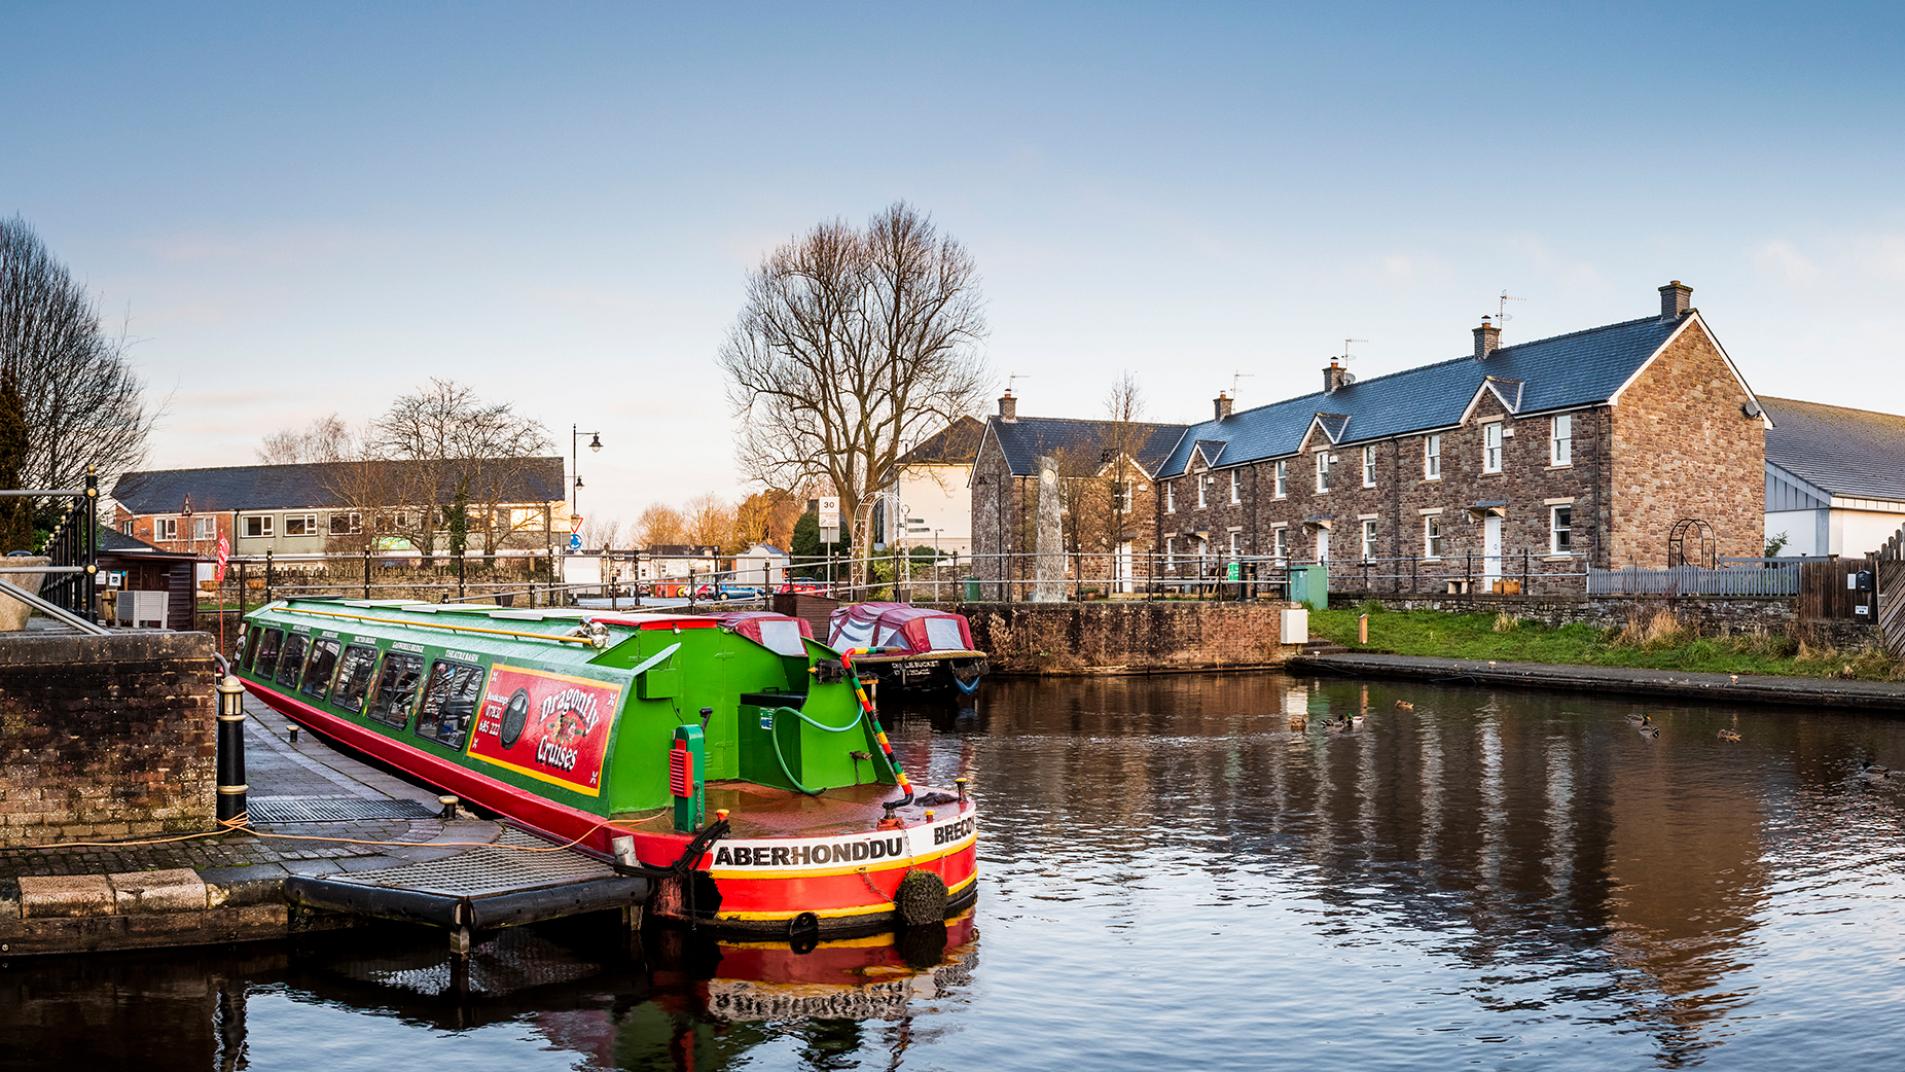 Image of Brecon canal with a colourful long boat in the foreground and a row of welsh cottages in the background